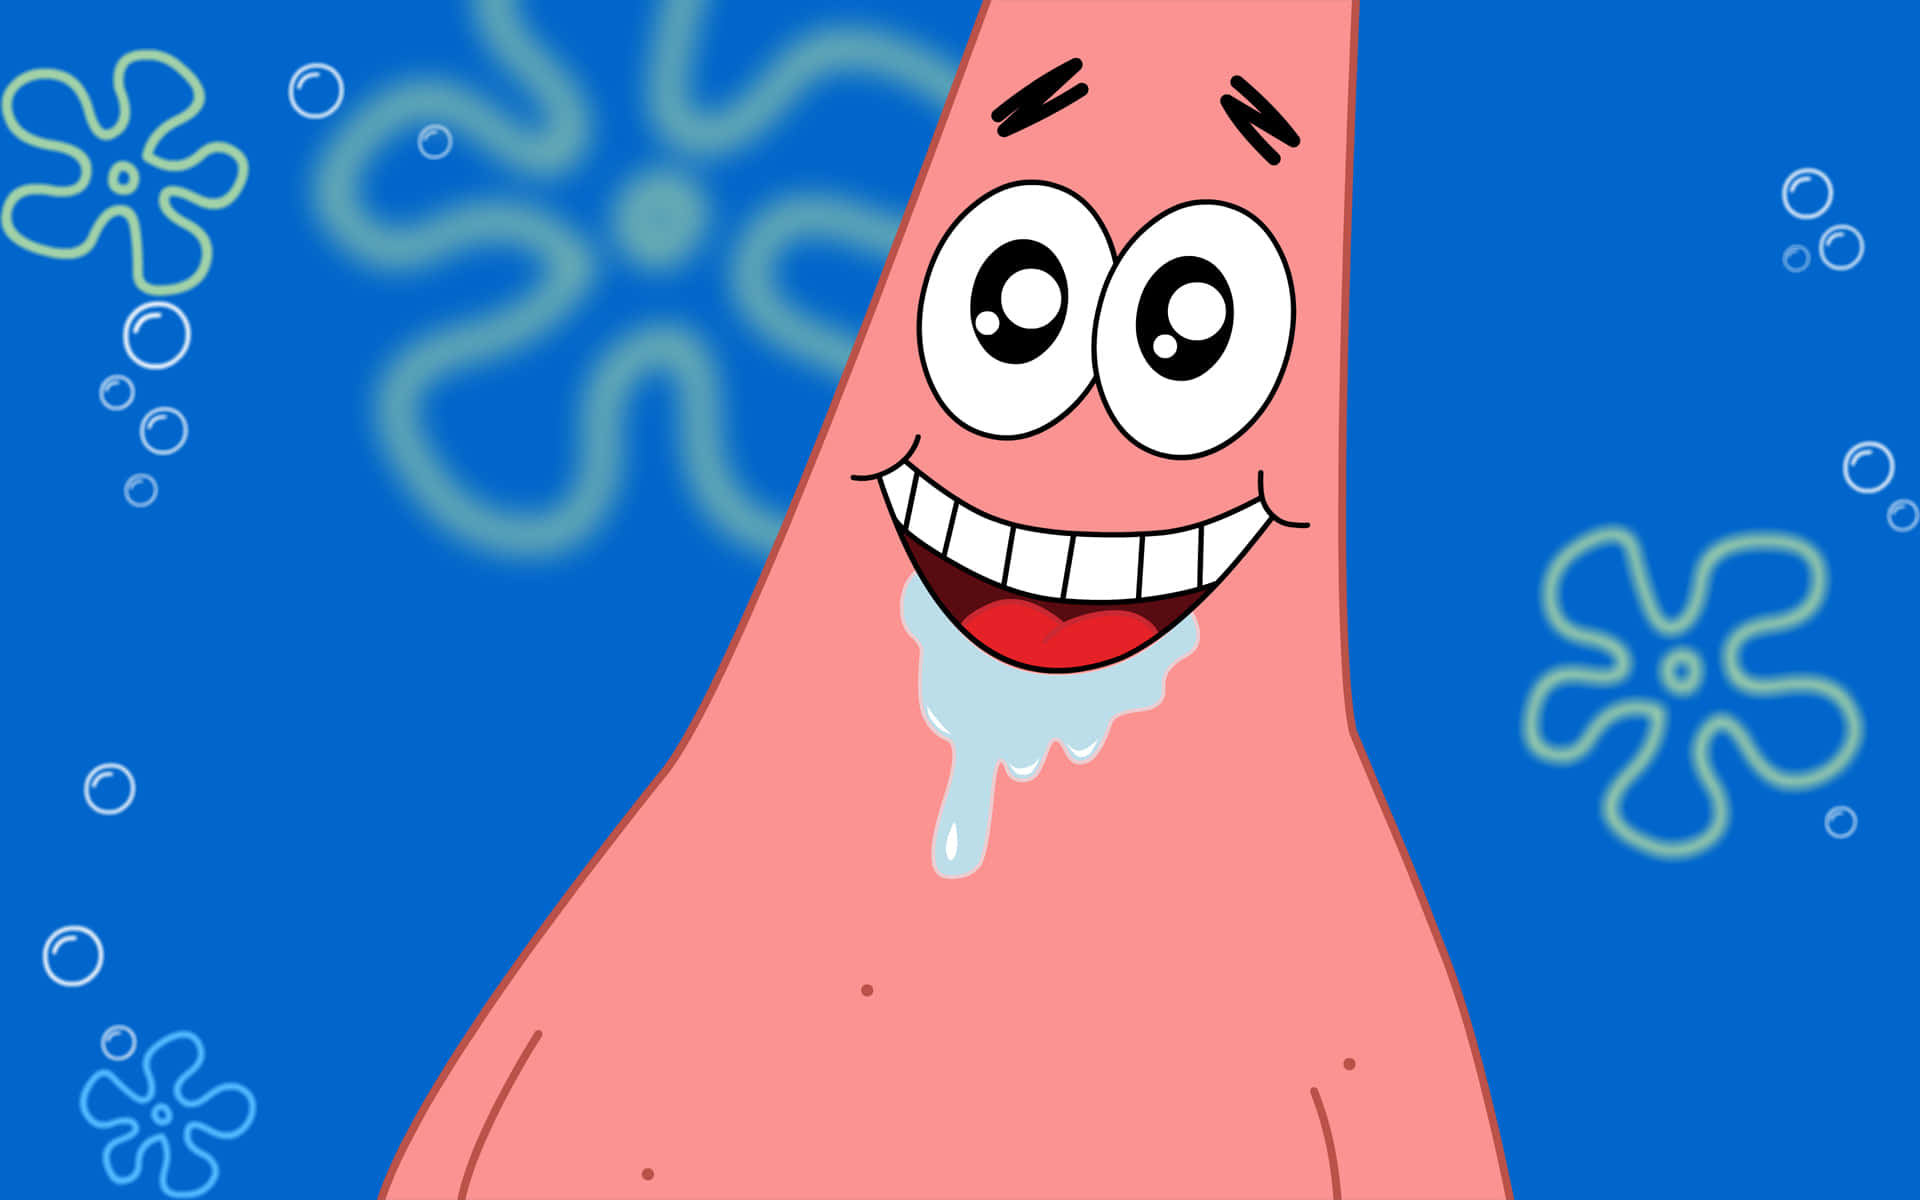 Patrick Star with Bucket on Head Hilarious Wallpapers - Wallpapers